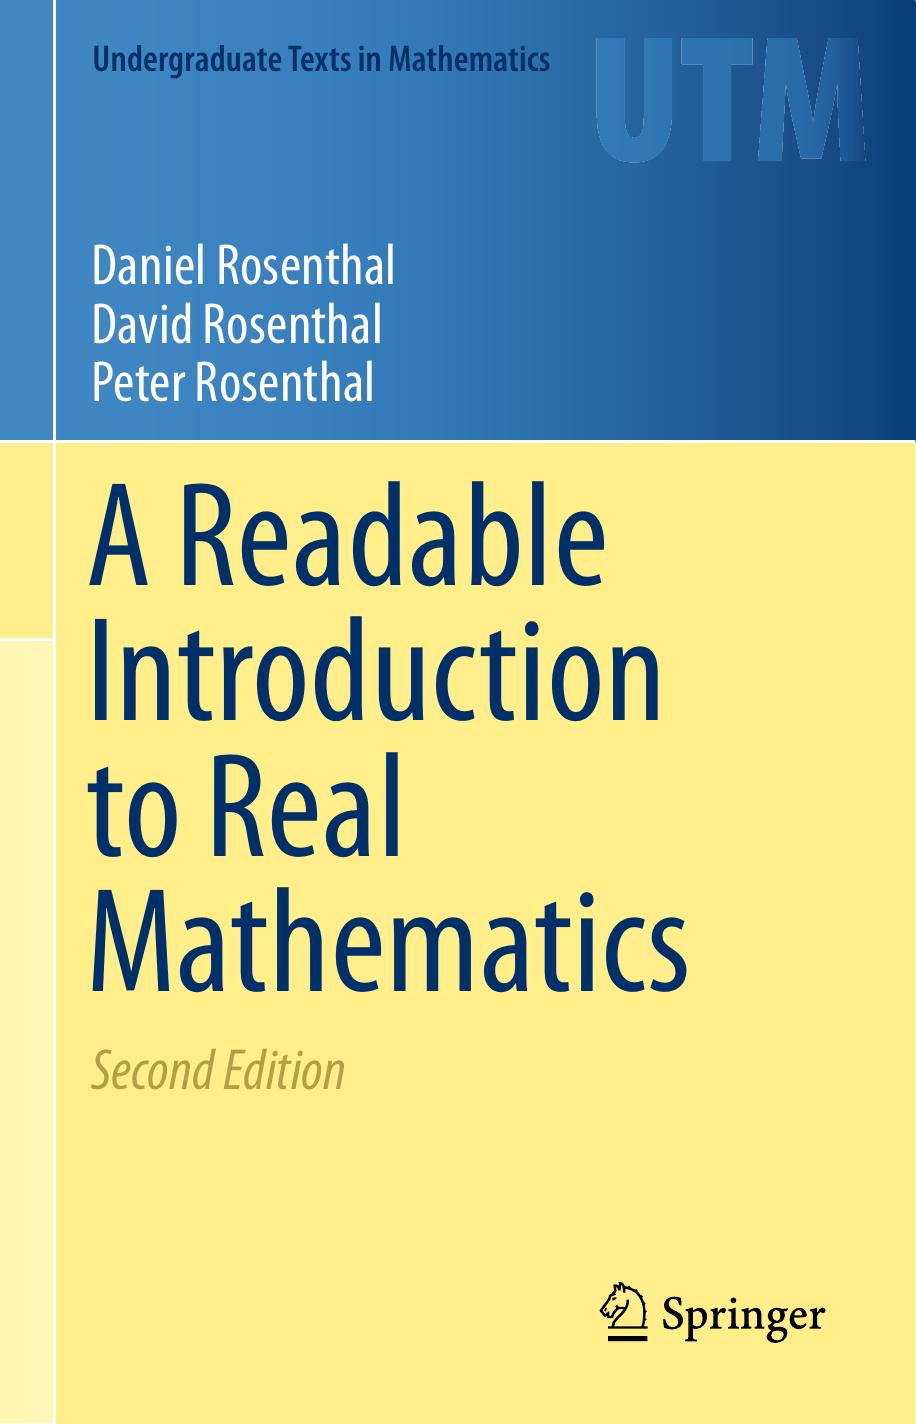 A Readable Introduction to Real Mathematics 2nd ed. 2018.pdf